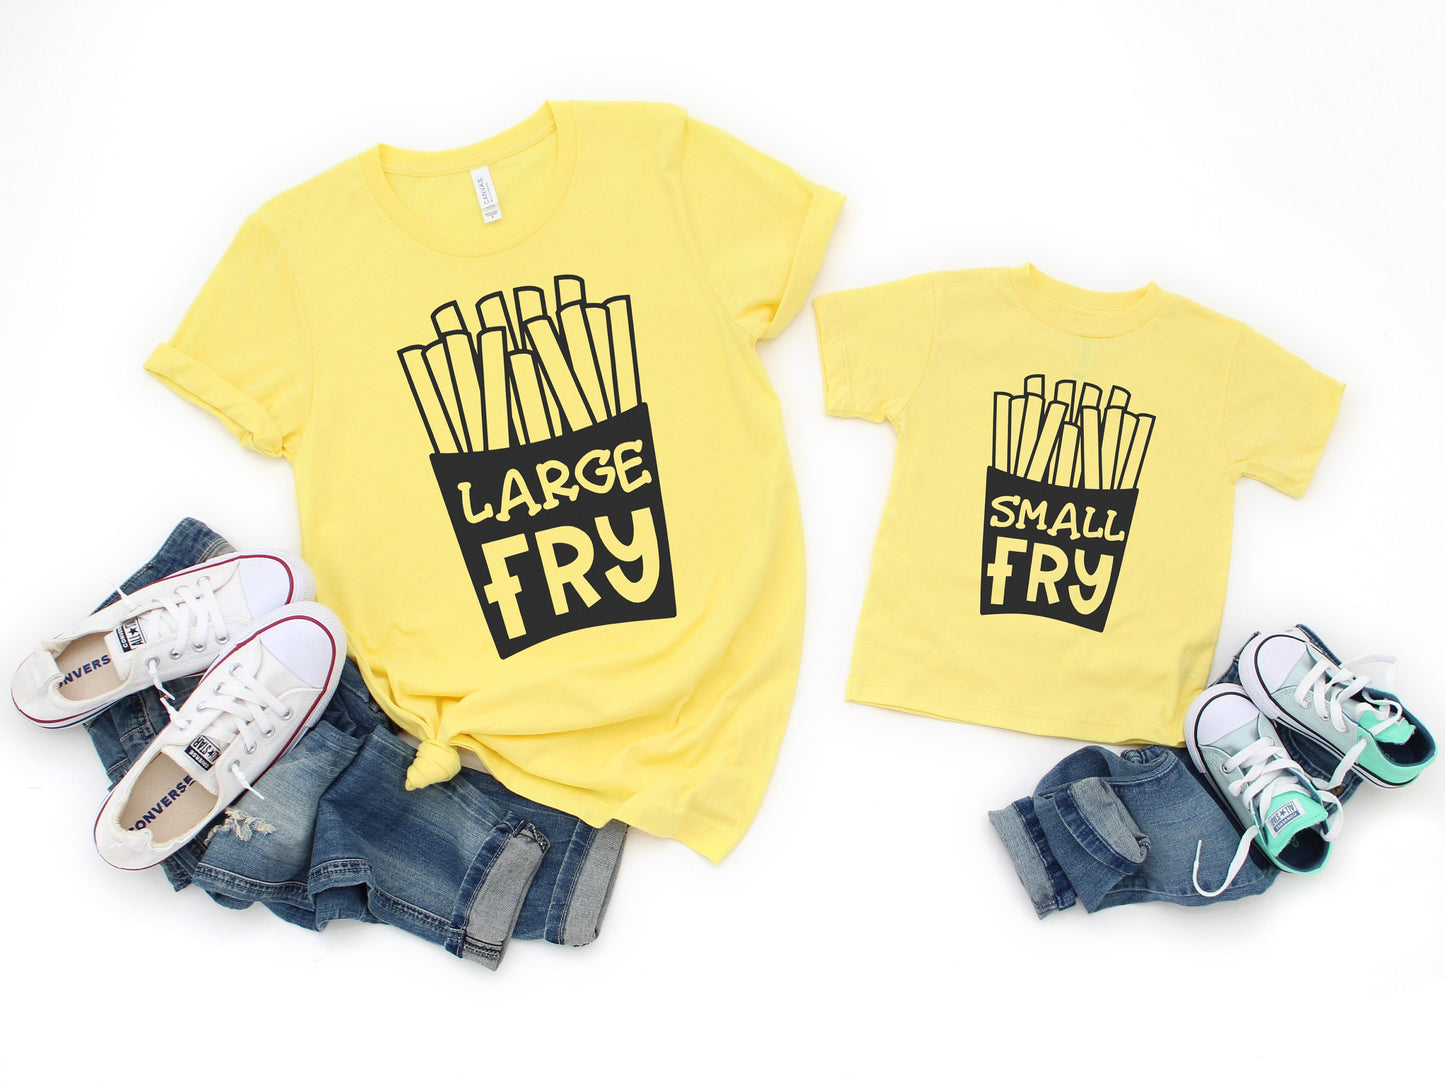 Large Fry and Small Fry Unisex Matching t-shirts - Mommy and Me Shirts - Gift for Mom - Daddy and Me Shirts - Father's Day Gift